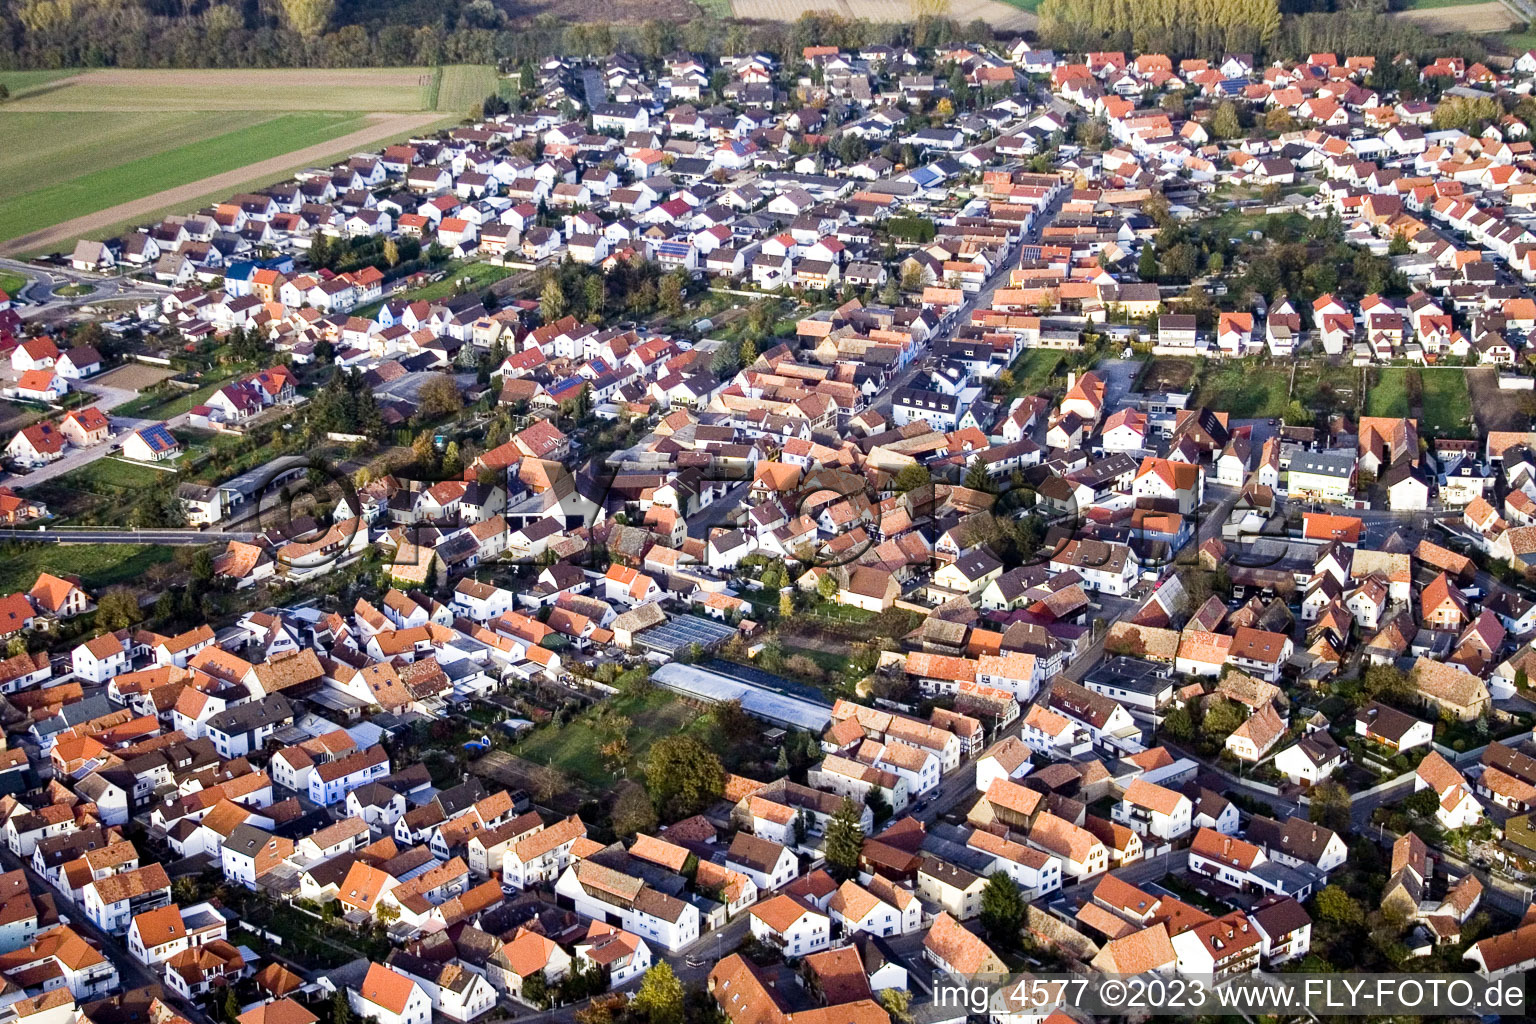 From the south in Hördt in the state Rhineland-Palatinate, Germany out of the air